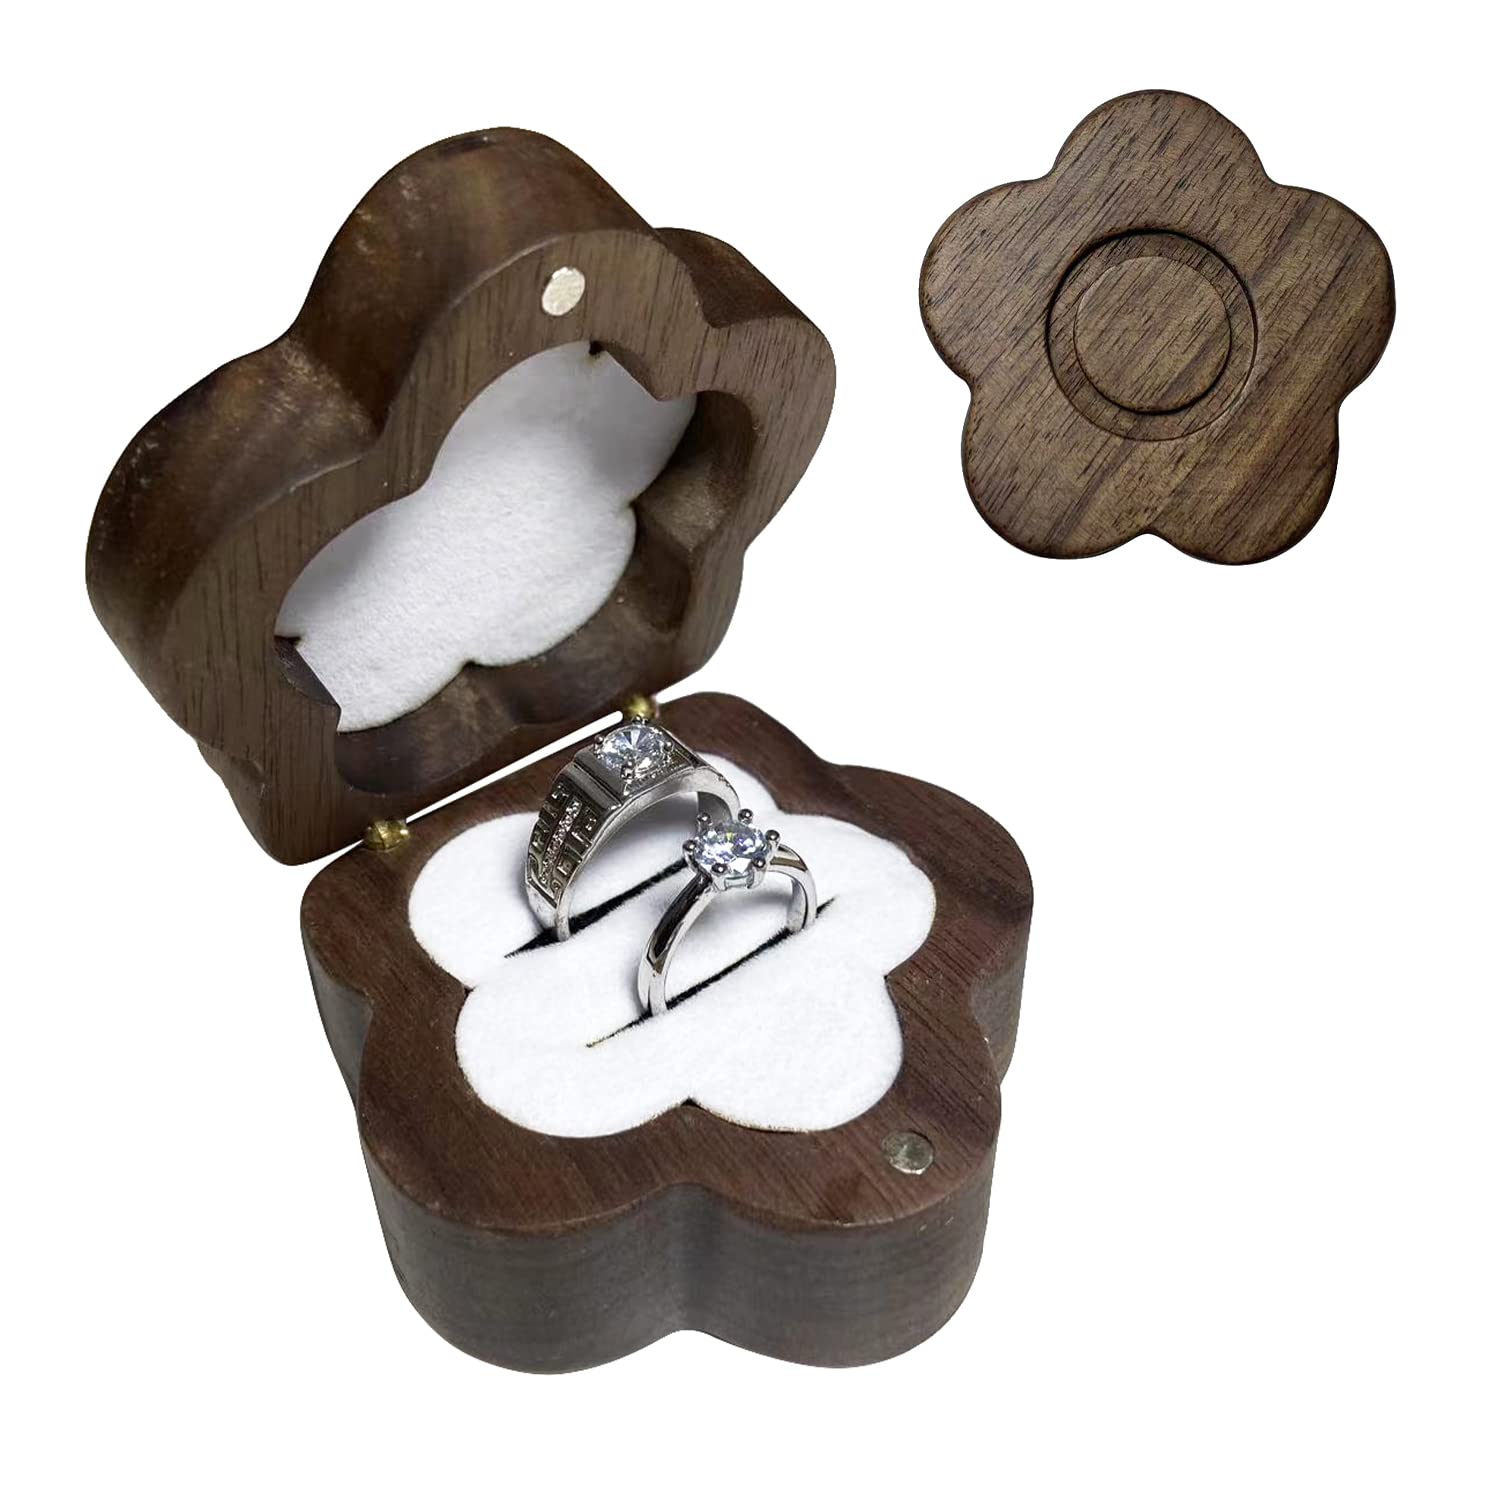 New Arrival Natural Wood Special Flower Shape Double Slots Wedding Ring Packaging Box